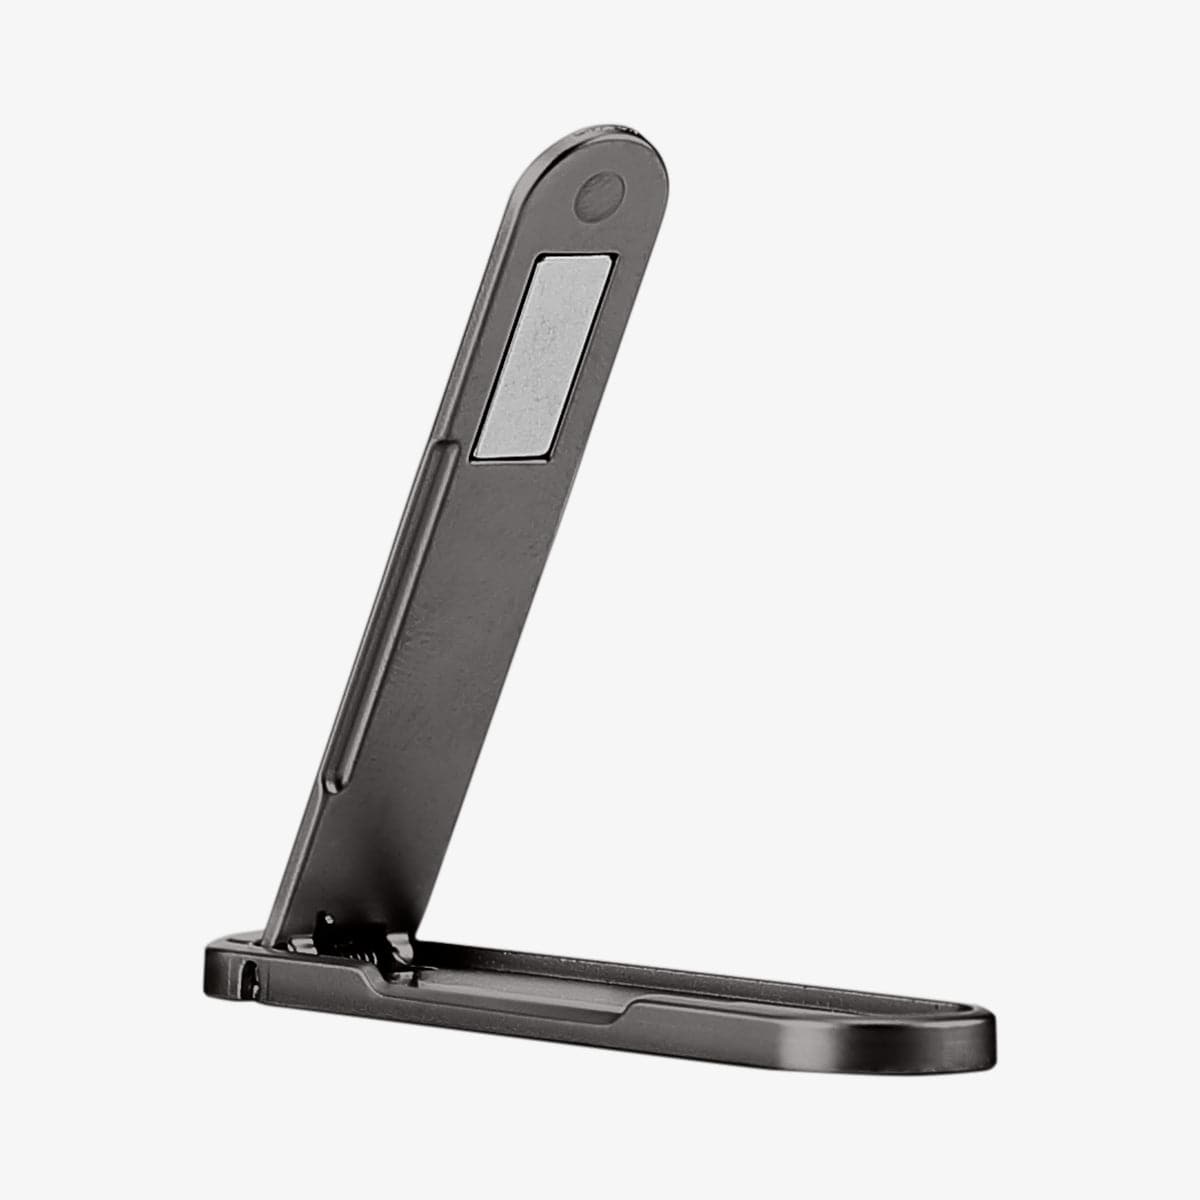 000EM20860 - U100 Universal Kickstand (Metal) in gunmetal showing the kickstand extended out